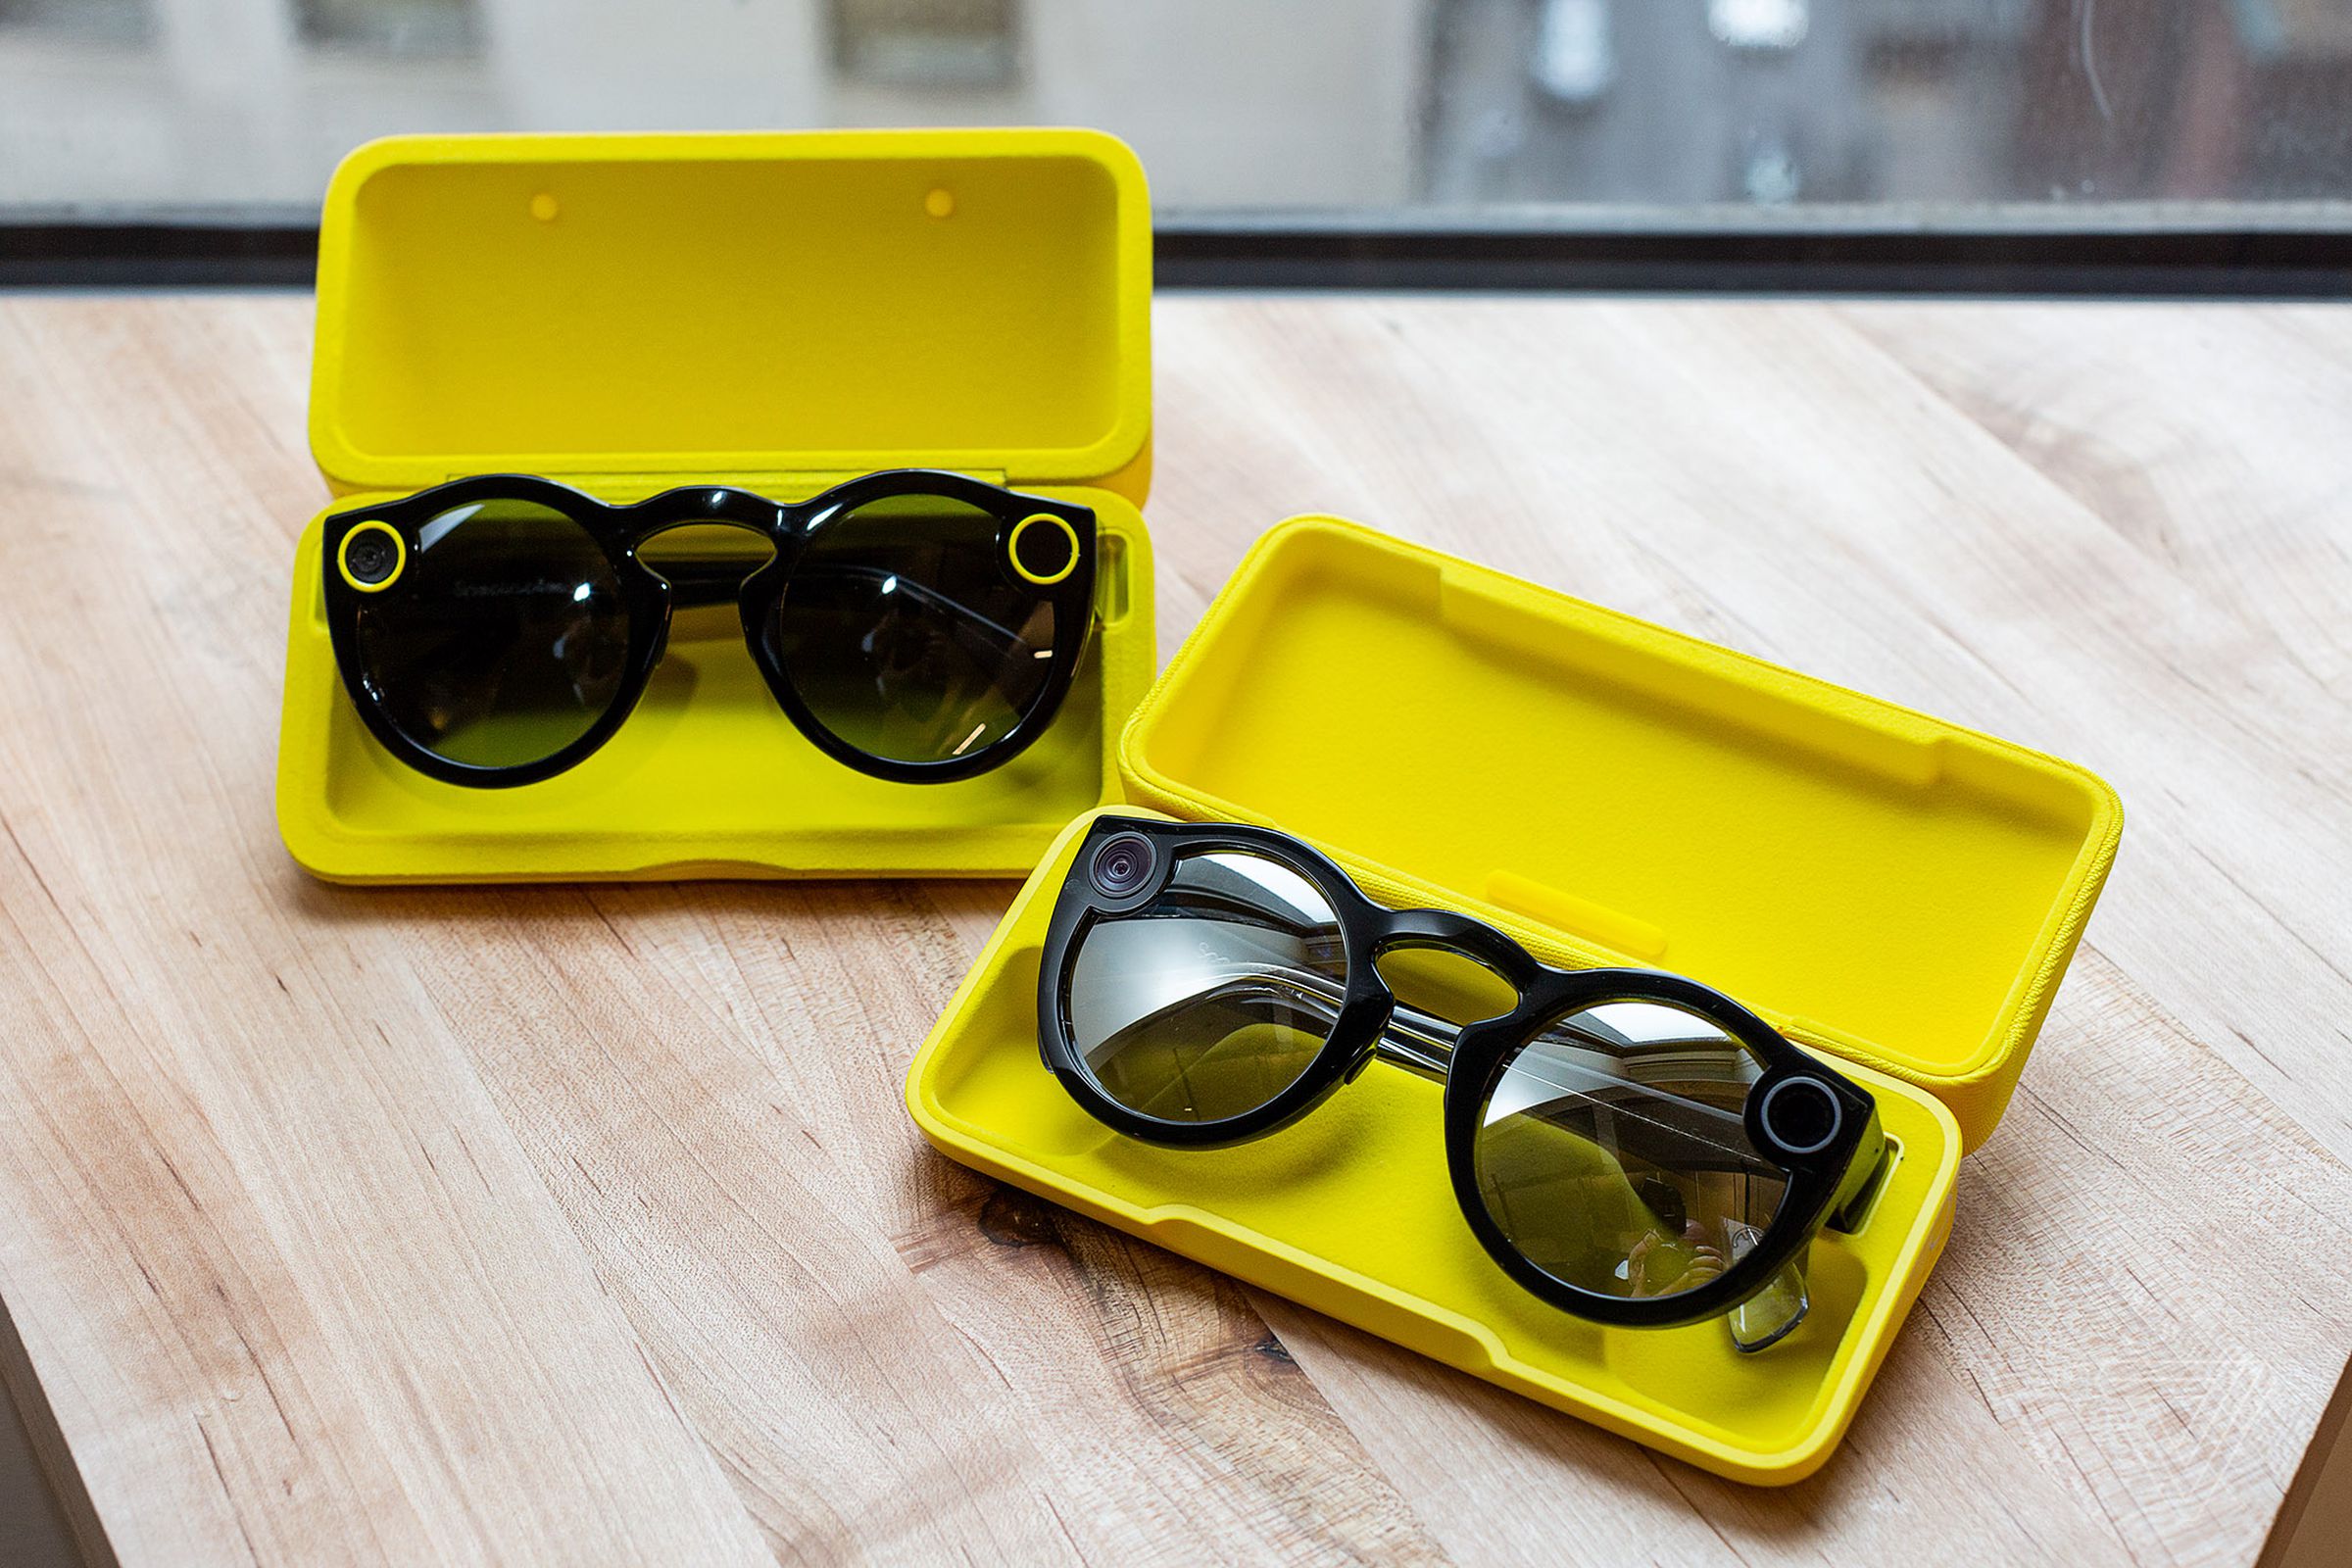 New Snap Spectacles (right), old Snap Spectacles (left)